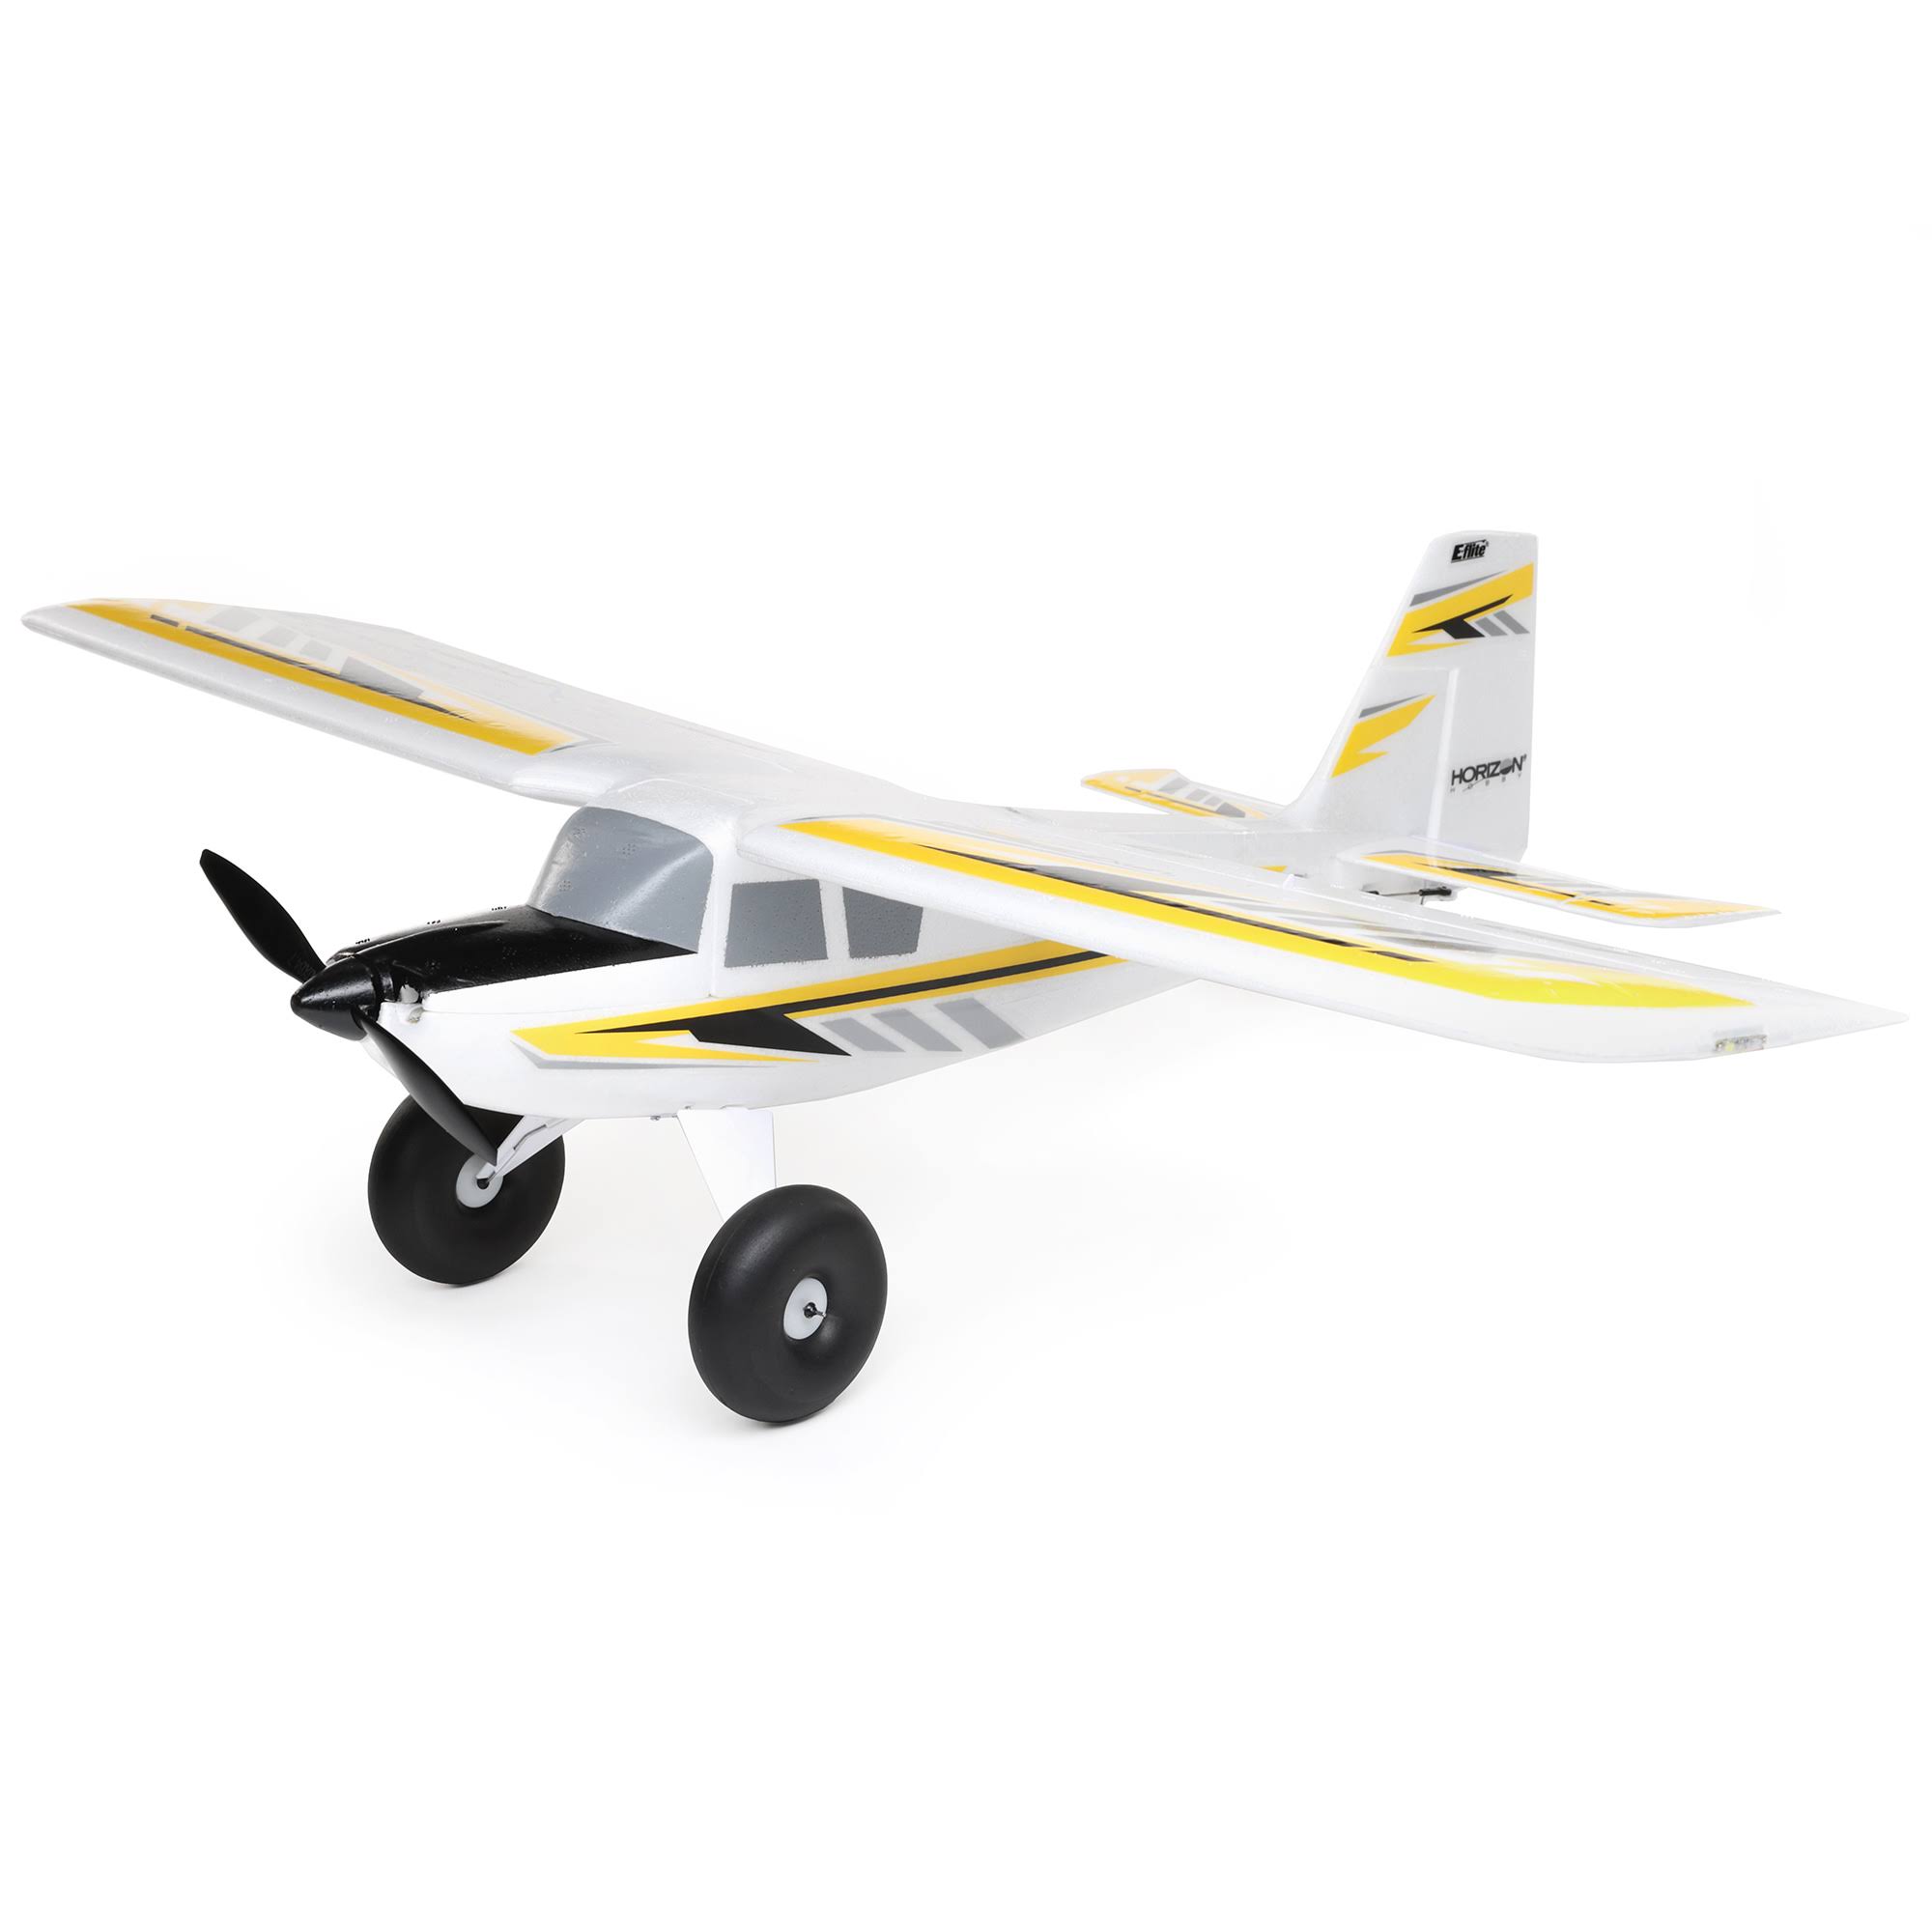 E-Flite Umx Timber X Bnf Basic With AS3X And Safe 570mm/EFLU7950